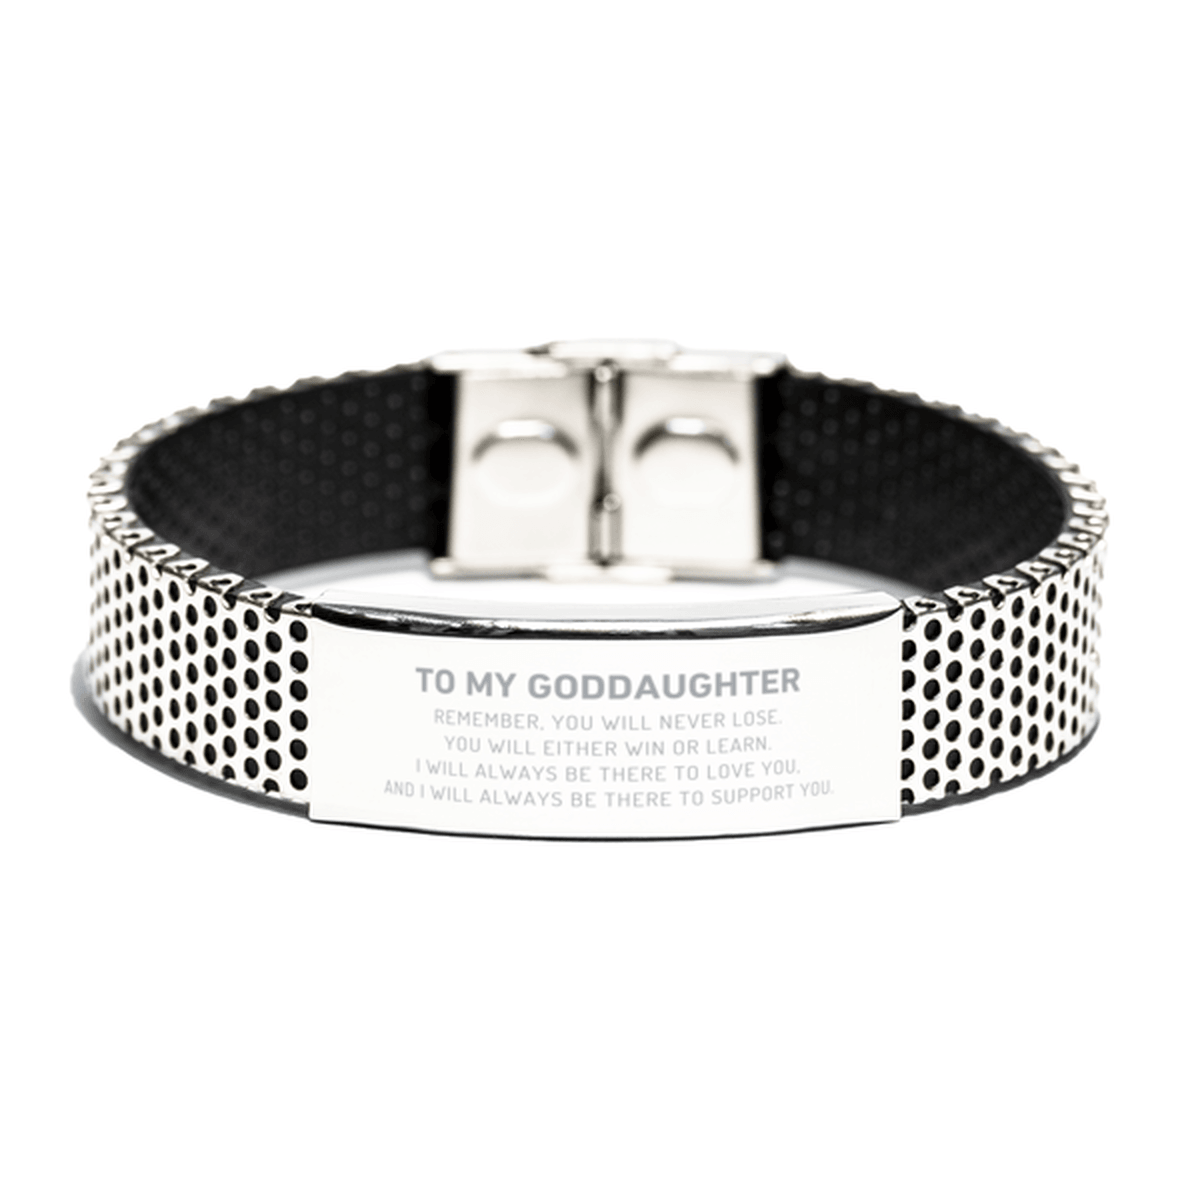 Goddaughter Gifts, To My Goddaughter Remember, you will never lose. You will either WIN or LEARN, Keepsake Stainless Steel Bracelet For Goddaughter Engraved, Birthday Christmas Gifts Ideas For Goddaughter X-mas Gifts